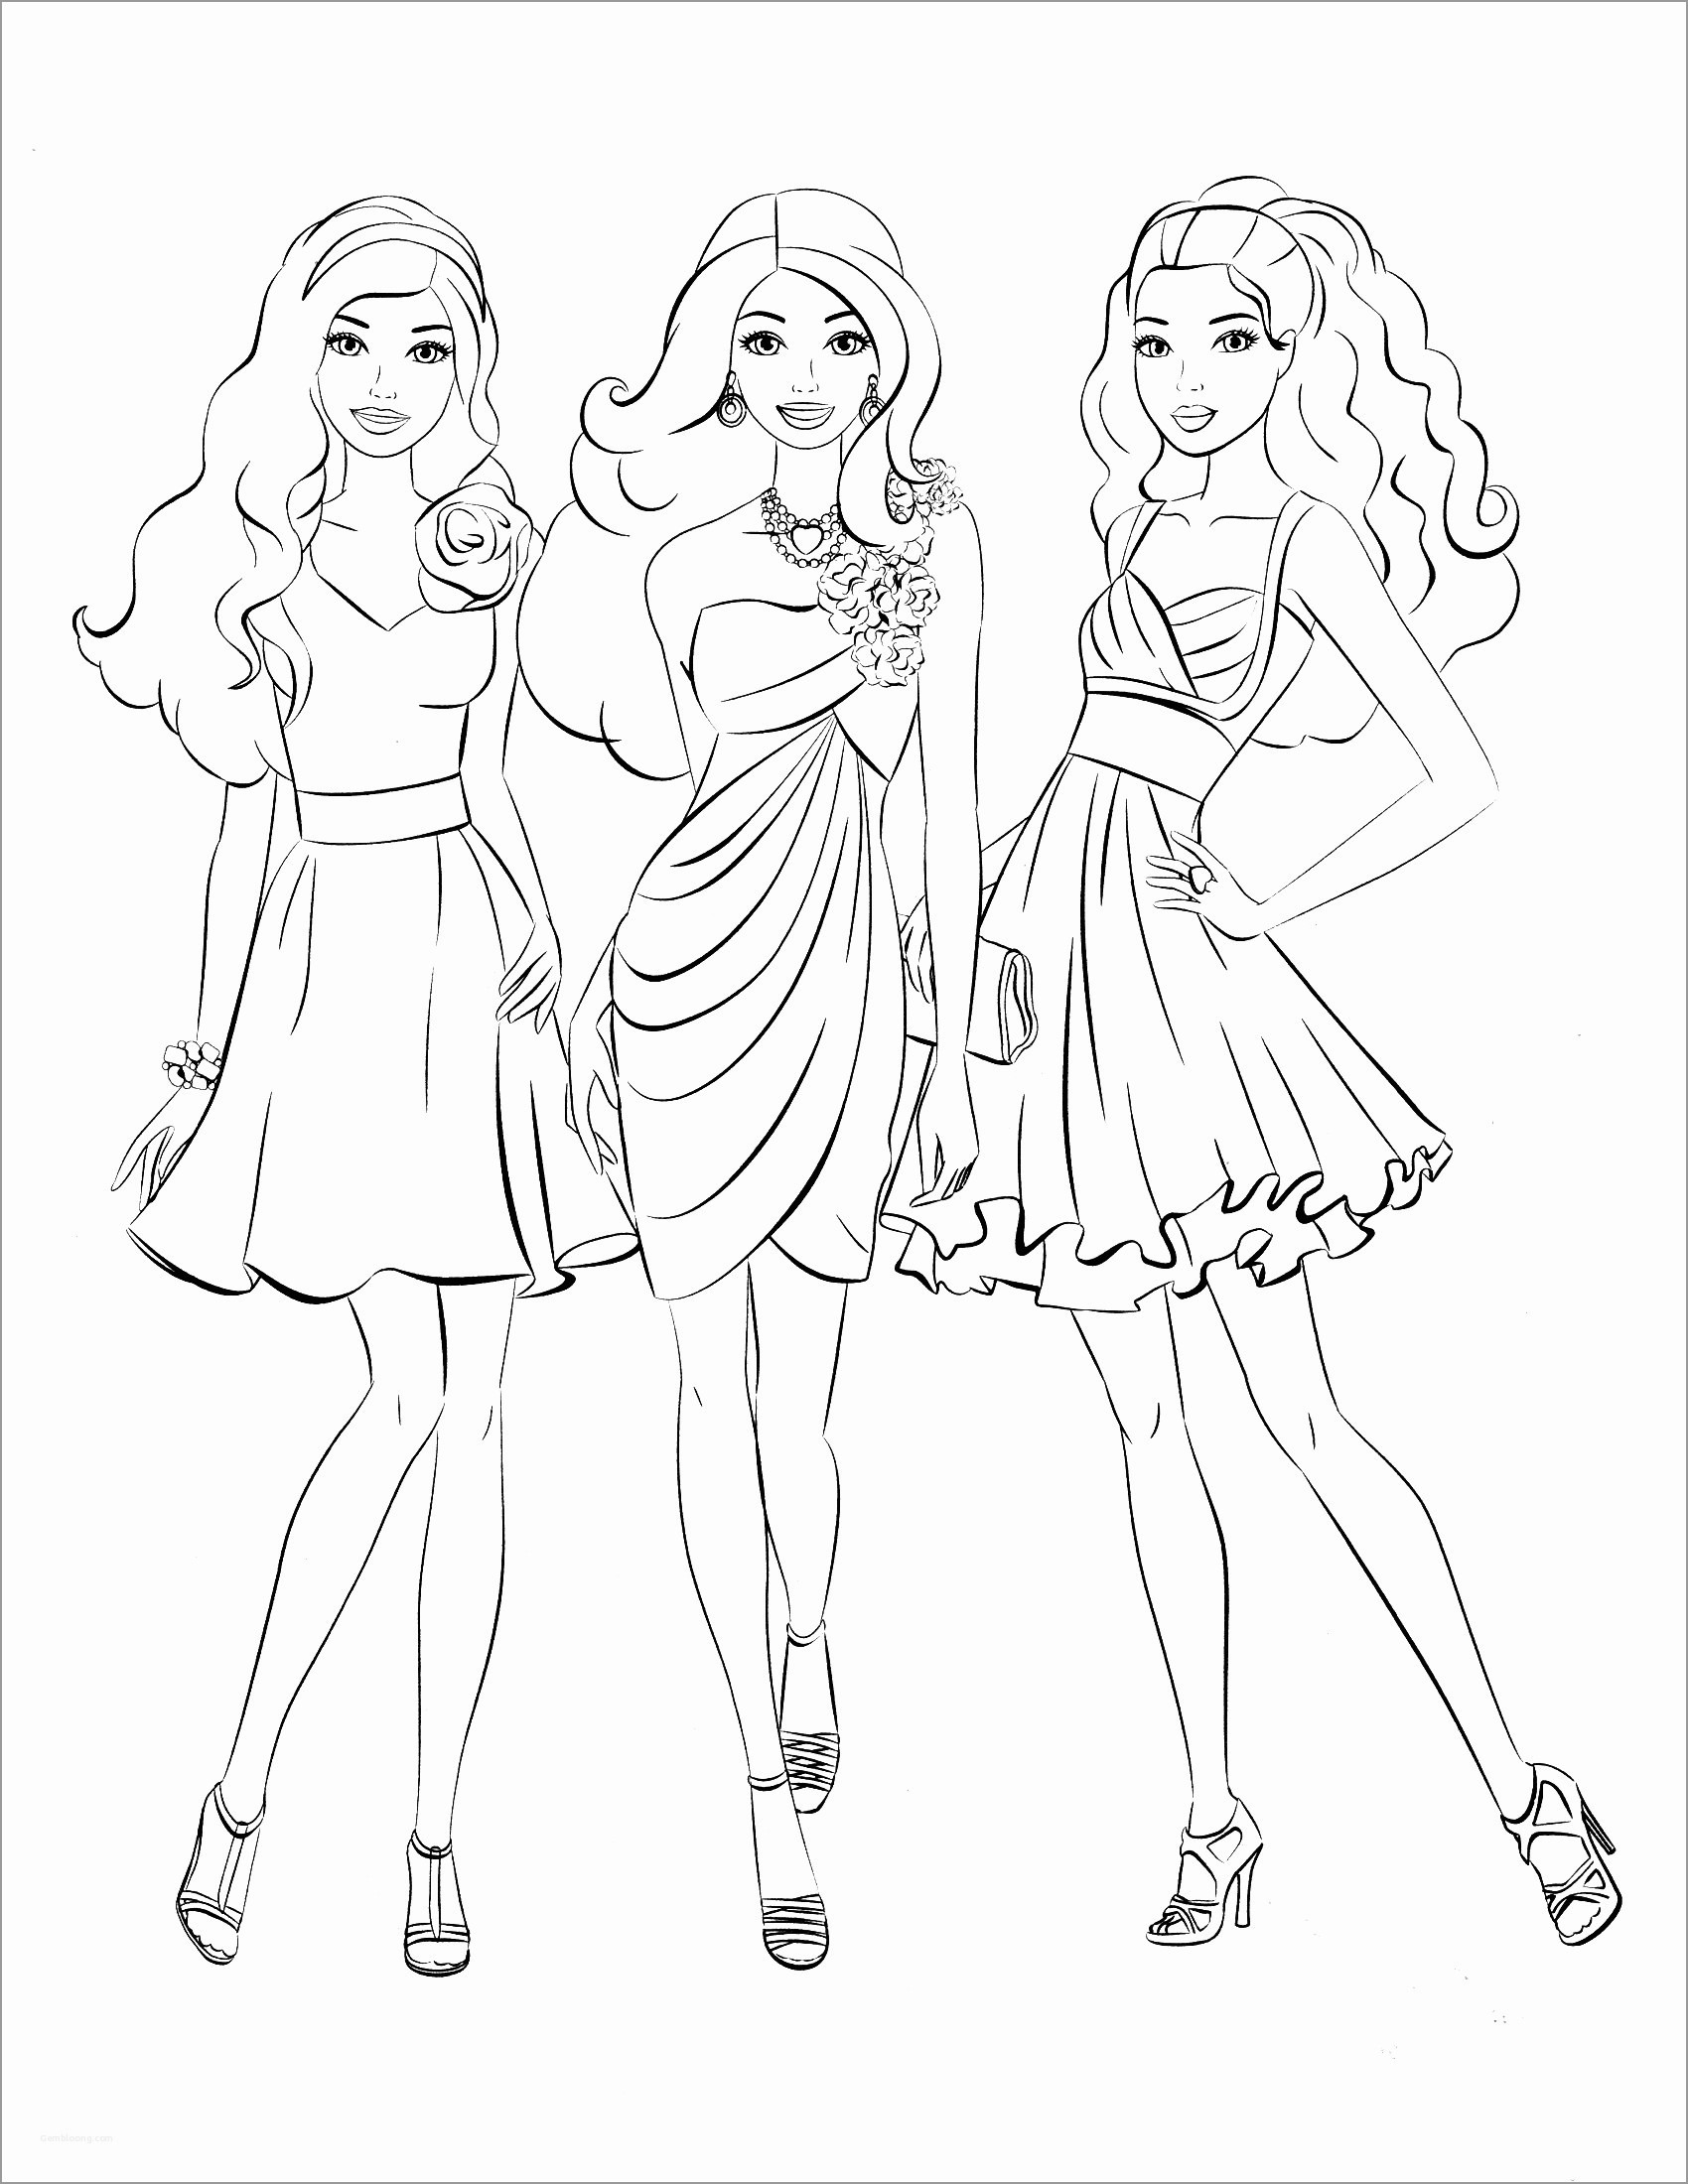 Barbie and Friends Coloring Page   ColoringBay